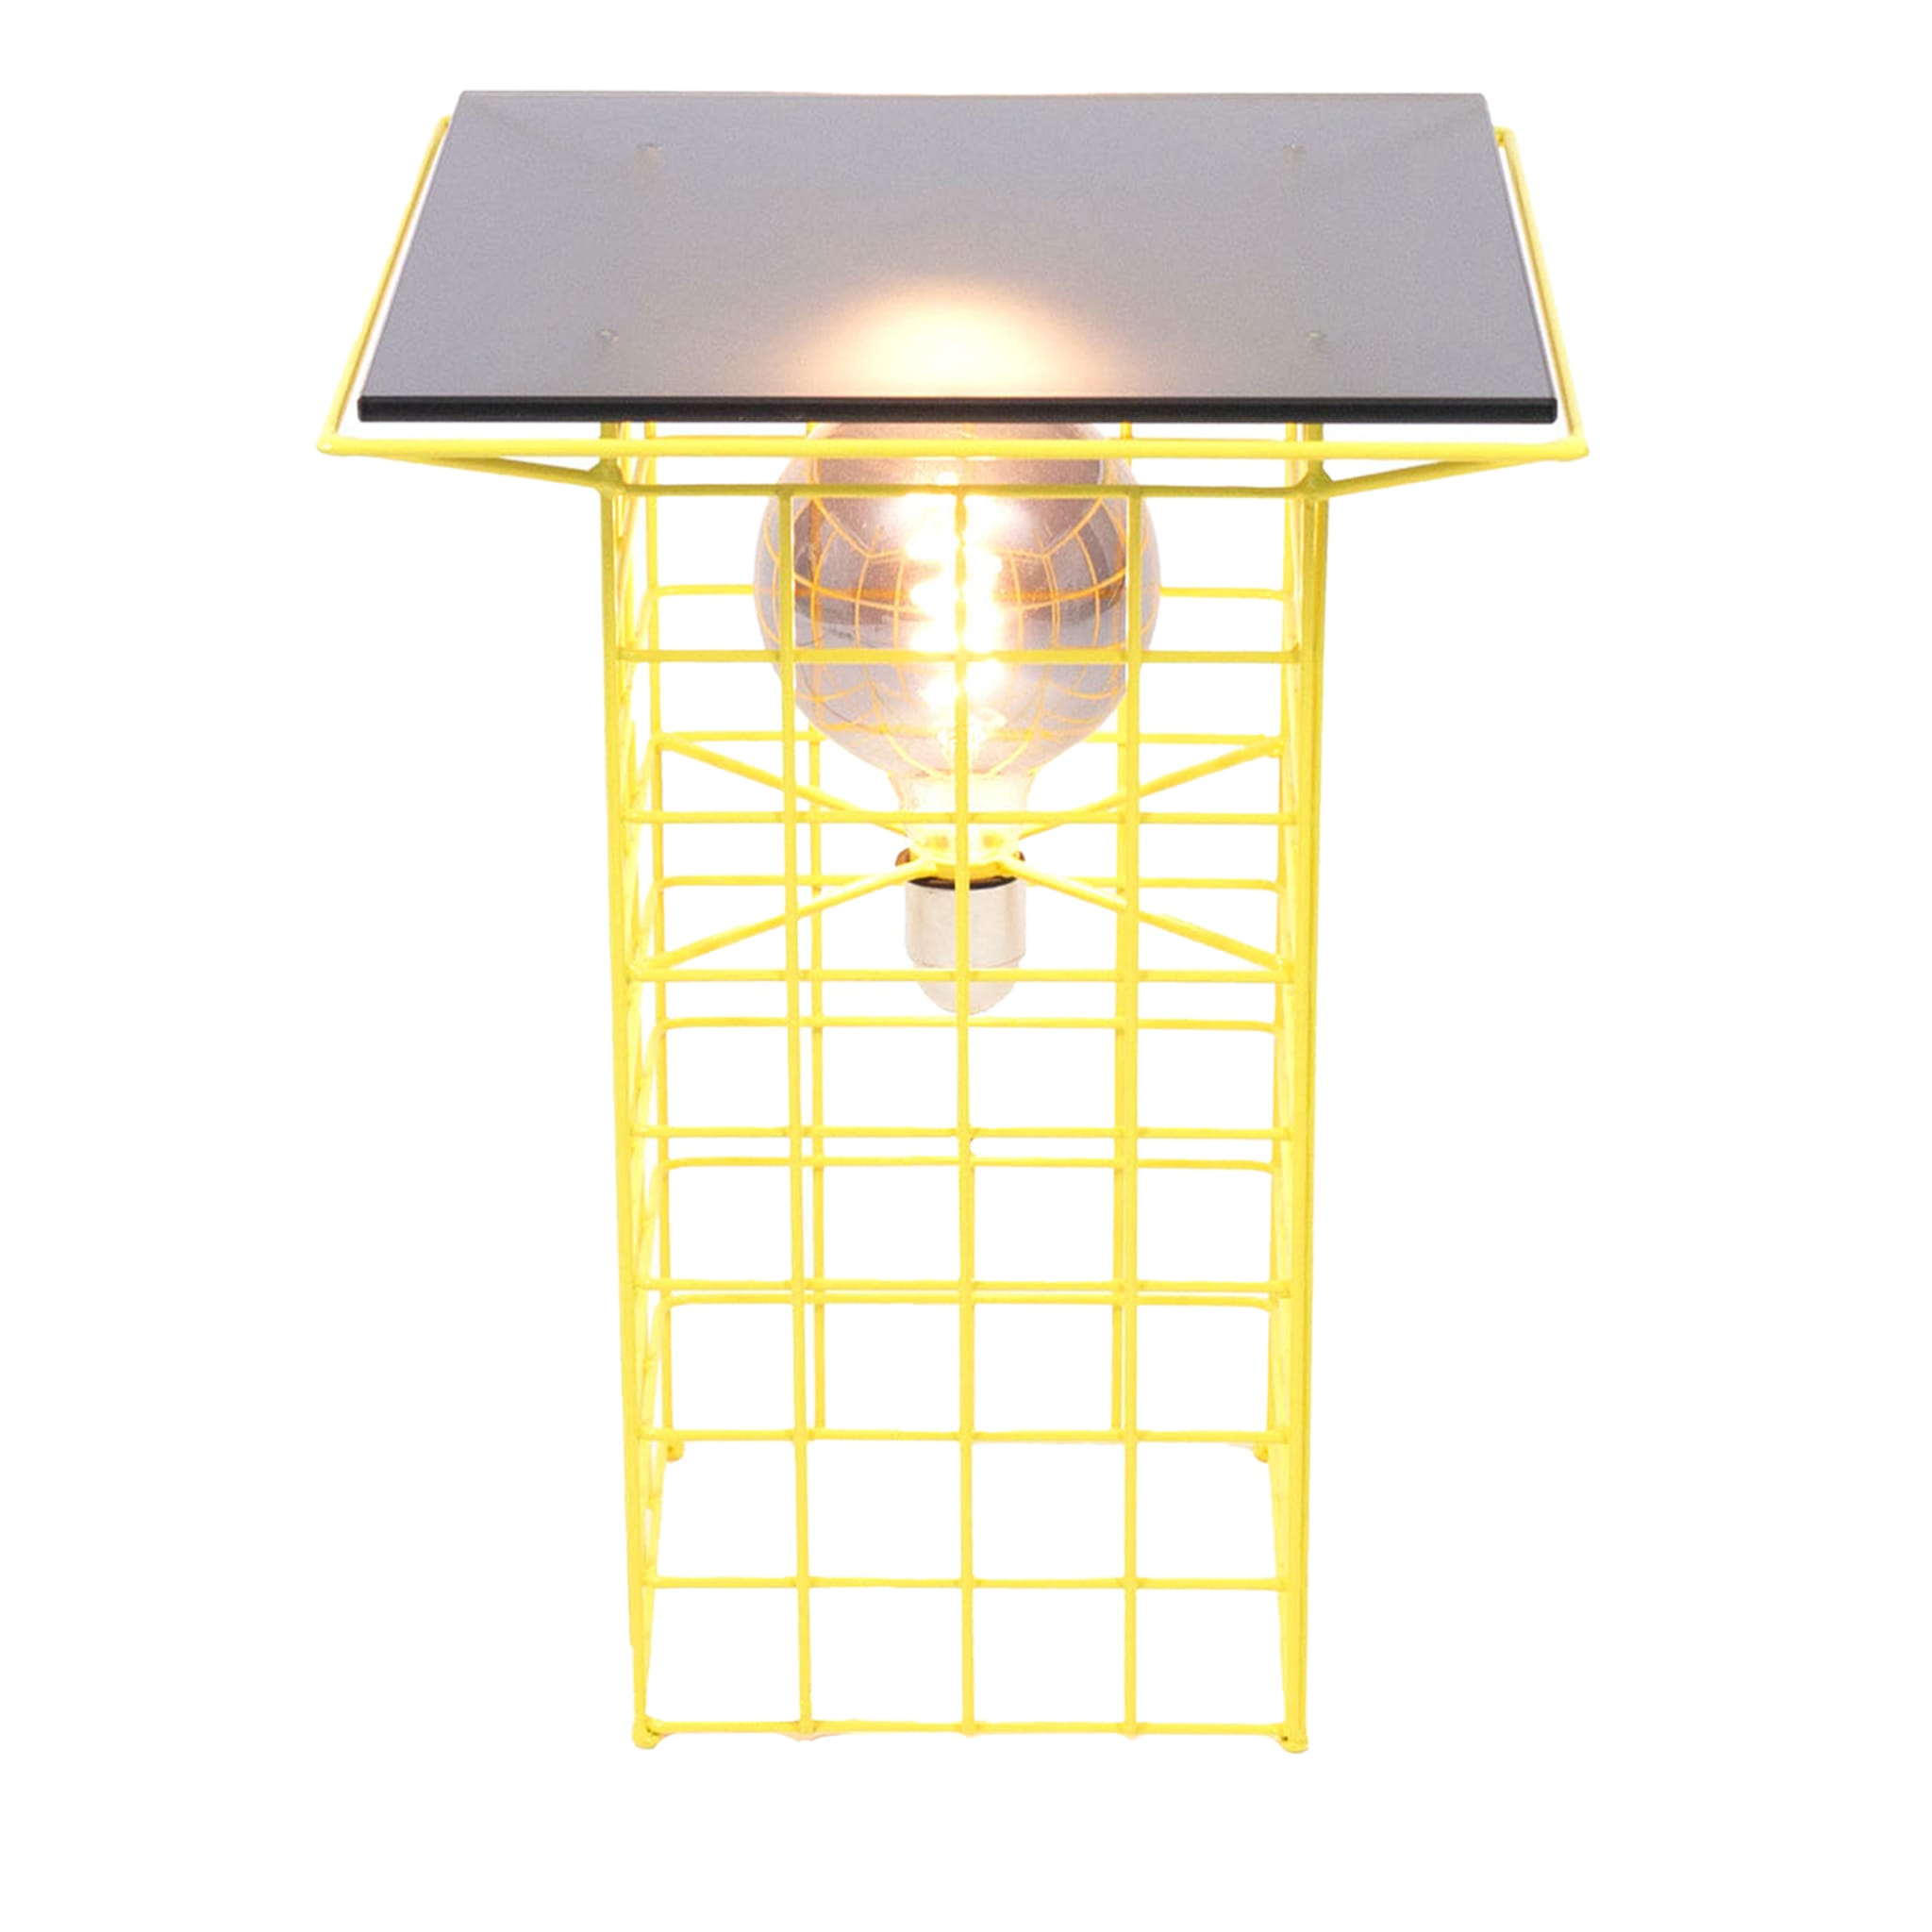 Krid Yellow Table & Lamp Combo By Clémence Seilles - Main view